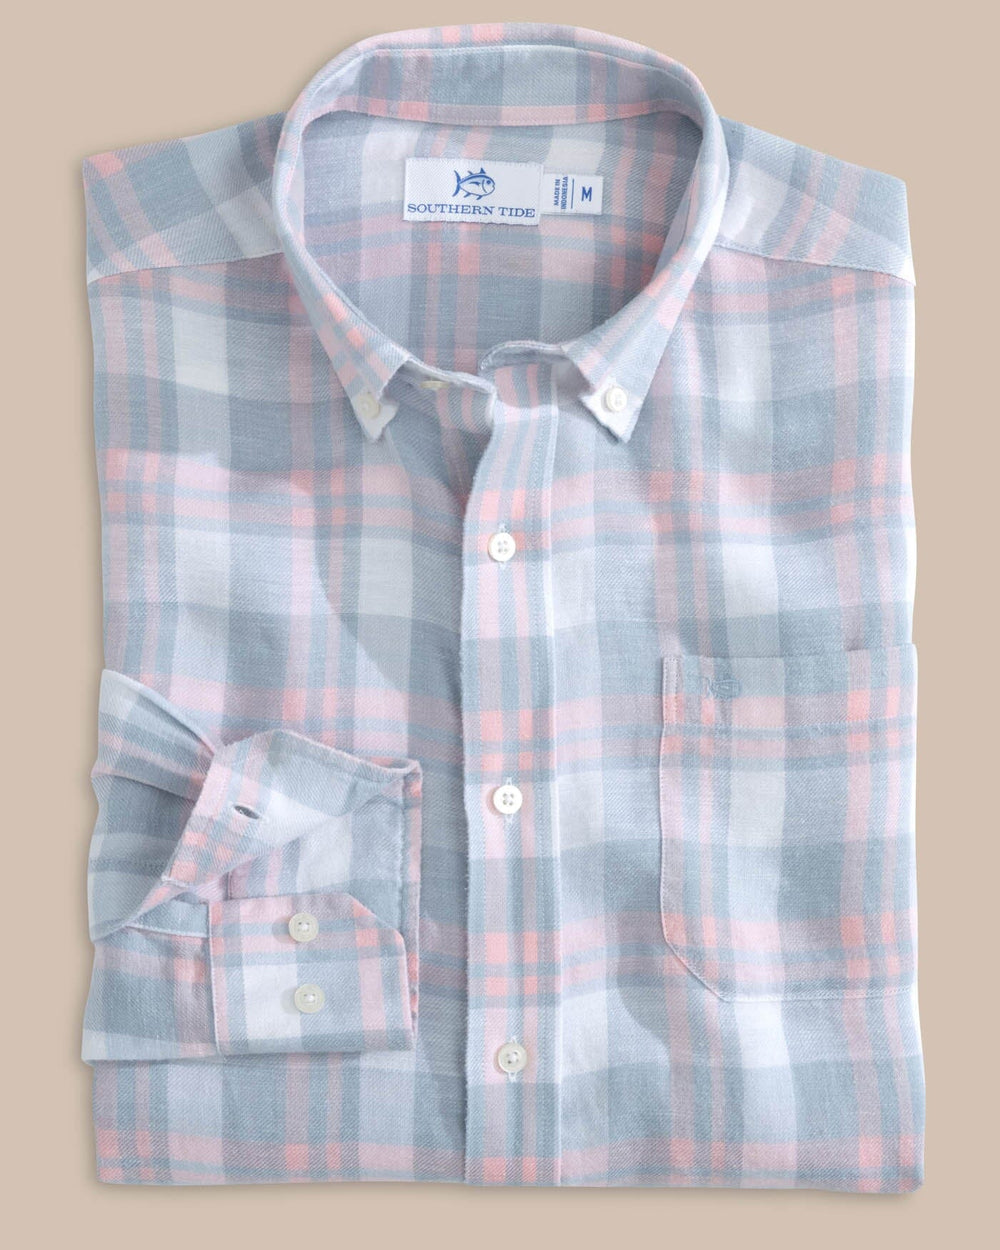 The front view of the Southern Tide Headland Reedy Plaid Long Sleeve Sport Shirt by Southern Tide - Tsunami Grey